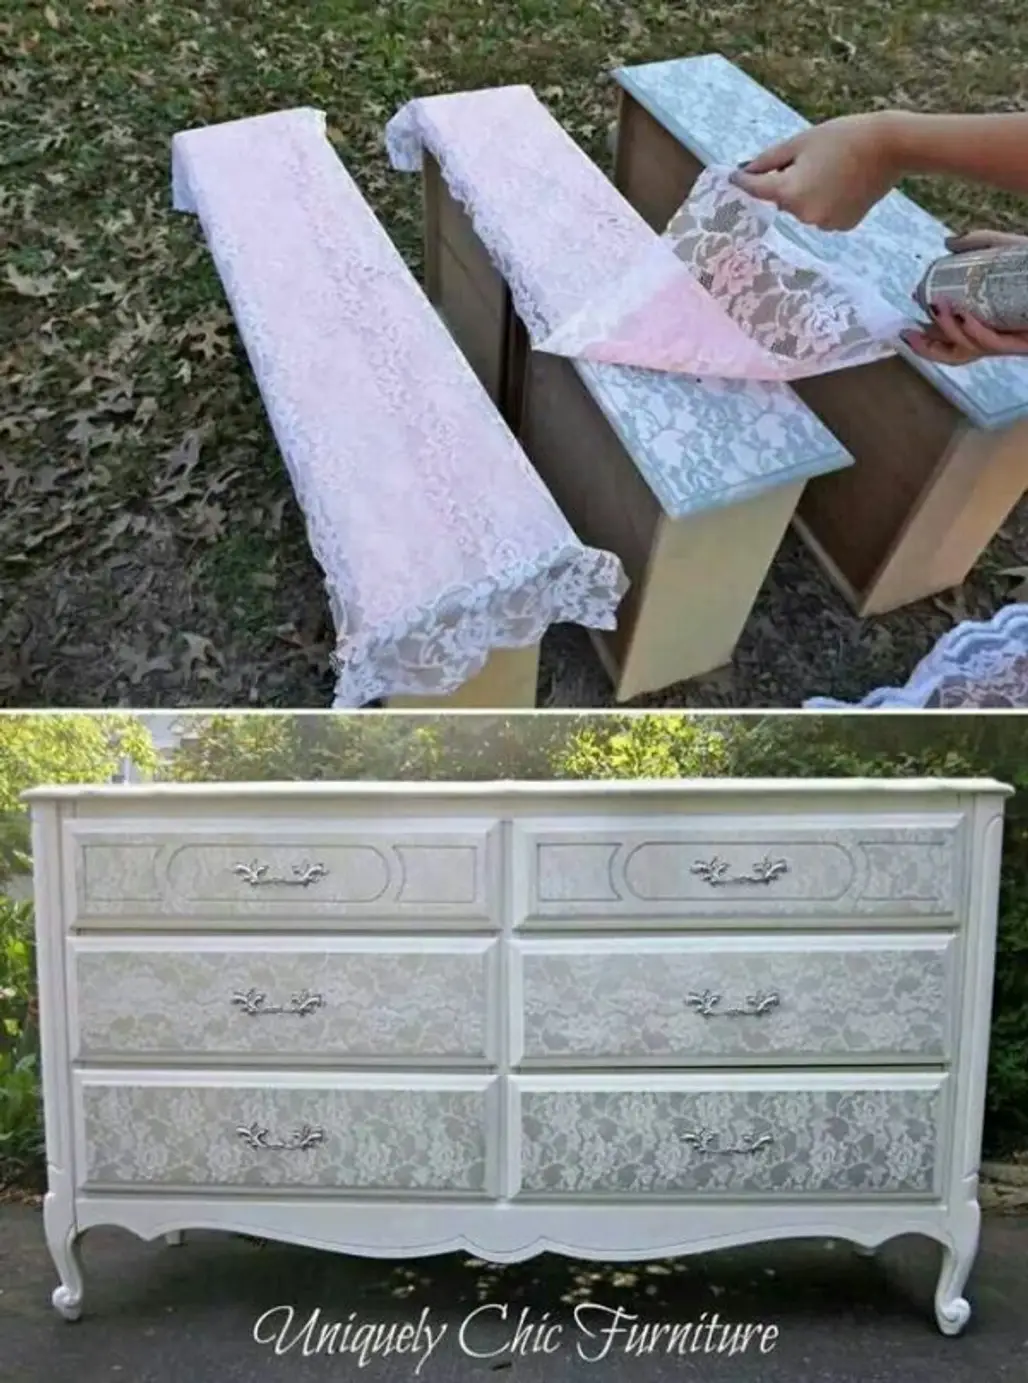 furniture,product,chest of drawers,bed,bed sheet,